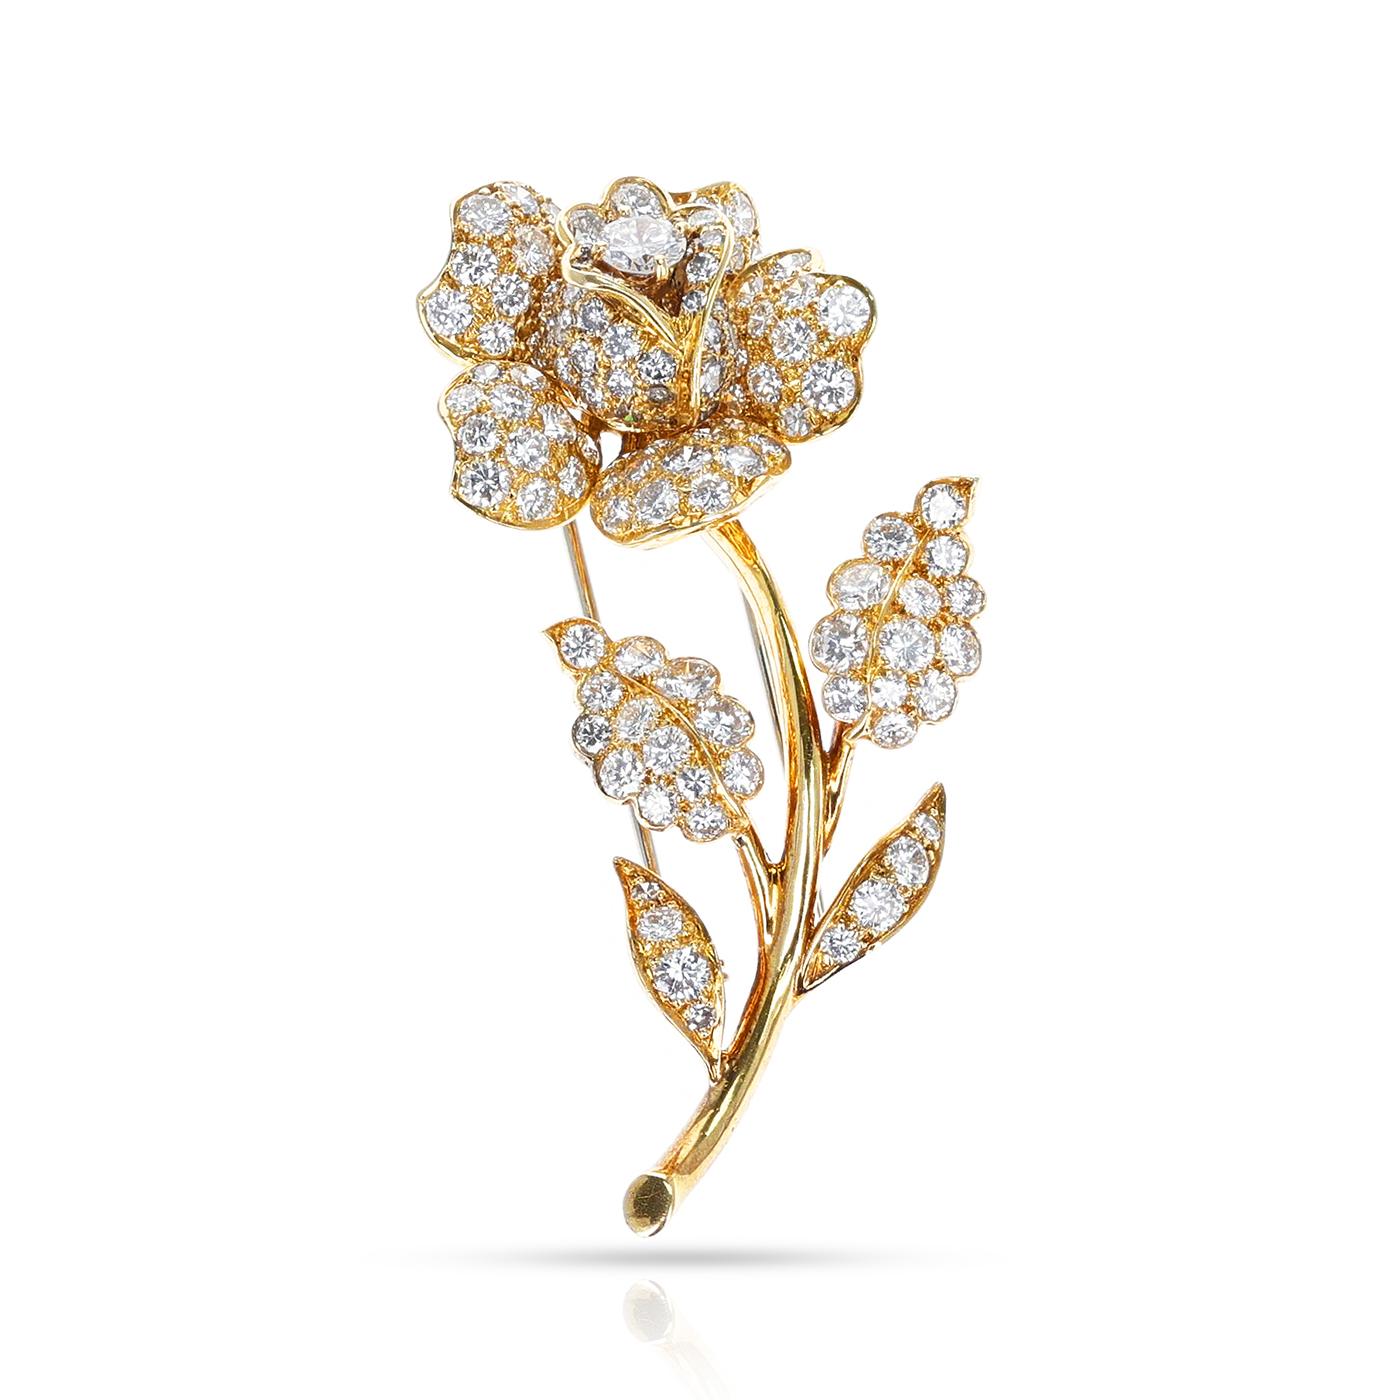 This exquisite Van Cleef & Arpels Diamond Rose Brooch Pin is crafted from 18k gold and features brilliant-cut diamonds for a stunning display of luxury. Its classic design makes it the perfect accessory for any evening look.



SKU 1148-ACIJAMPR